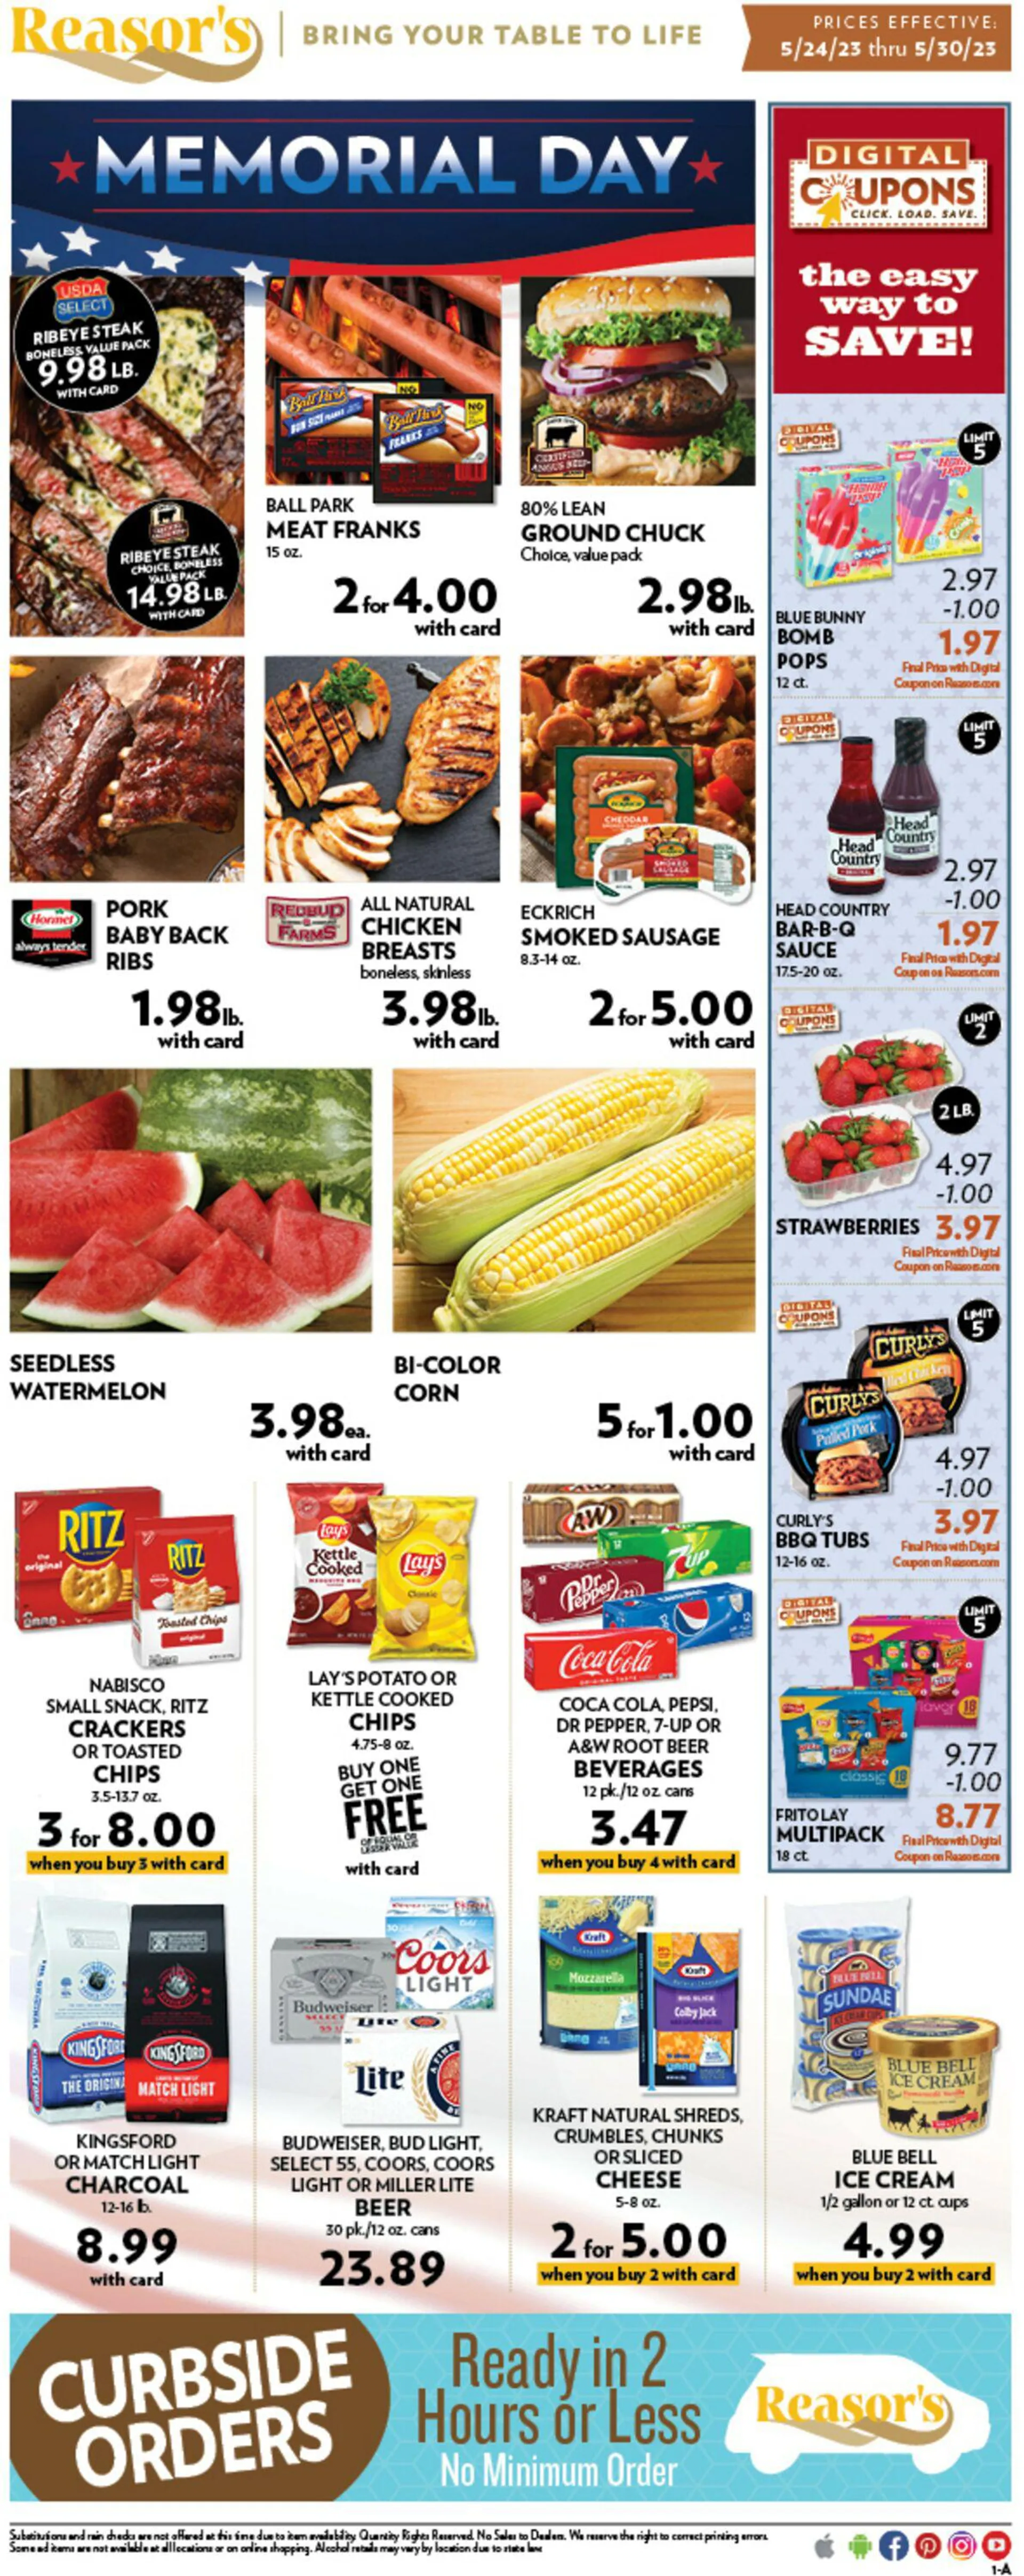 Reasors Current weekly ad - 1